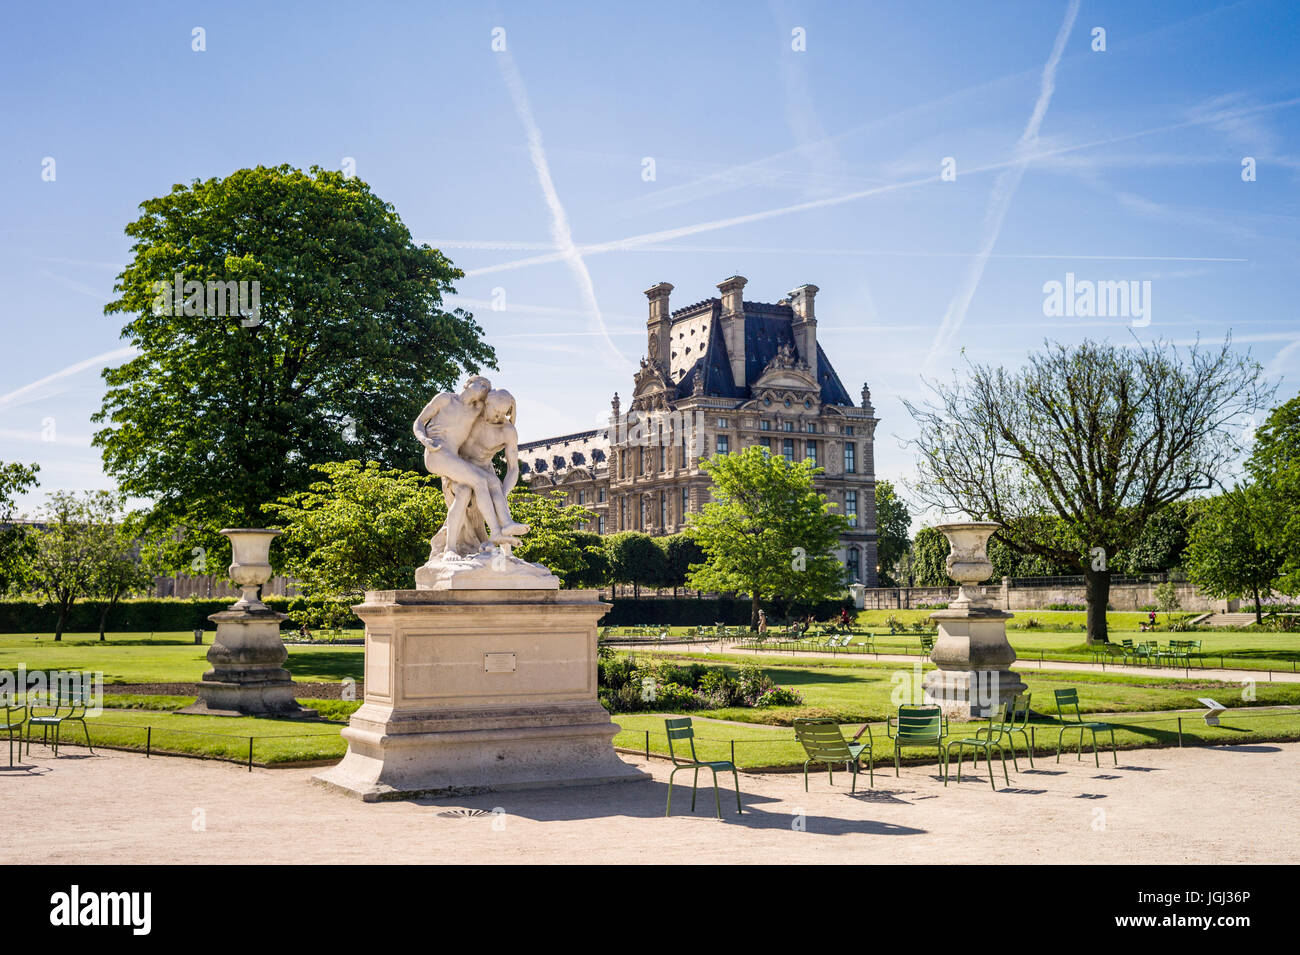 The Tuileries garden in Paris, France, by a sunny morning with the statue of the Good Samaritan and the Flore pavilion of the Louvre palace. Stock Photo